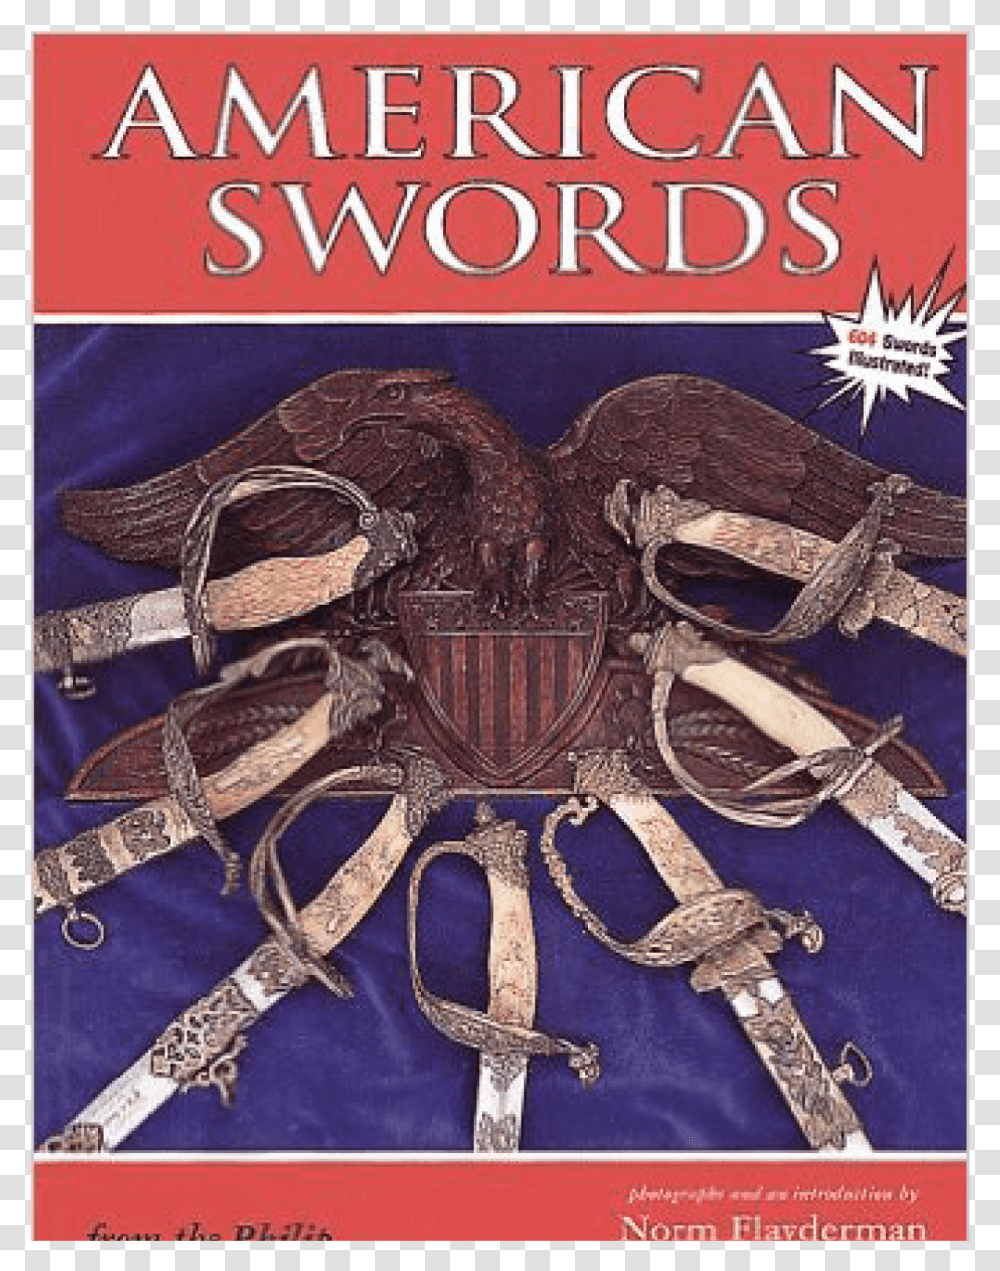 American Swords From The Philip Medicus Collection, Poster, Advertisement, Blade, Weapon Transparent Png